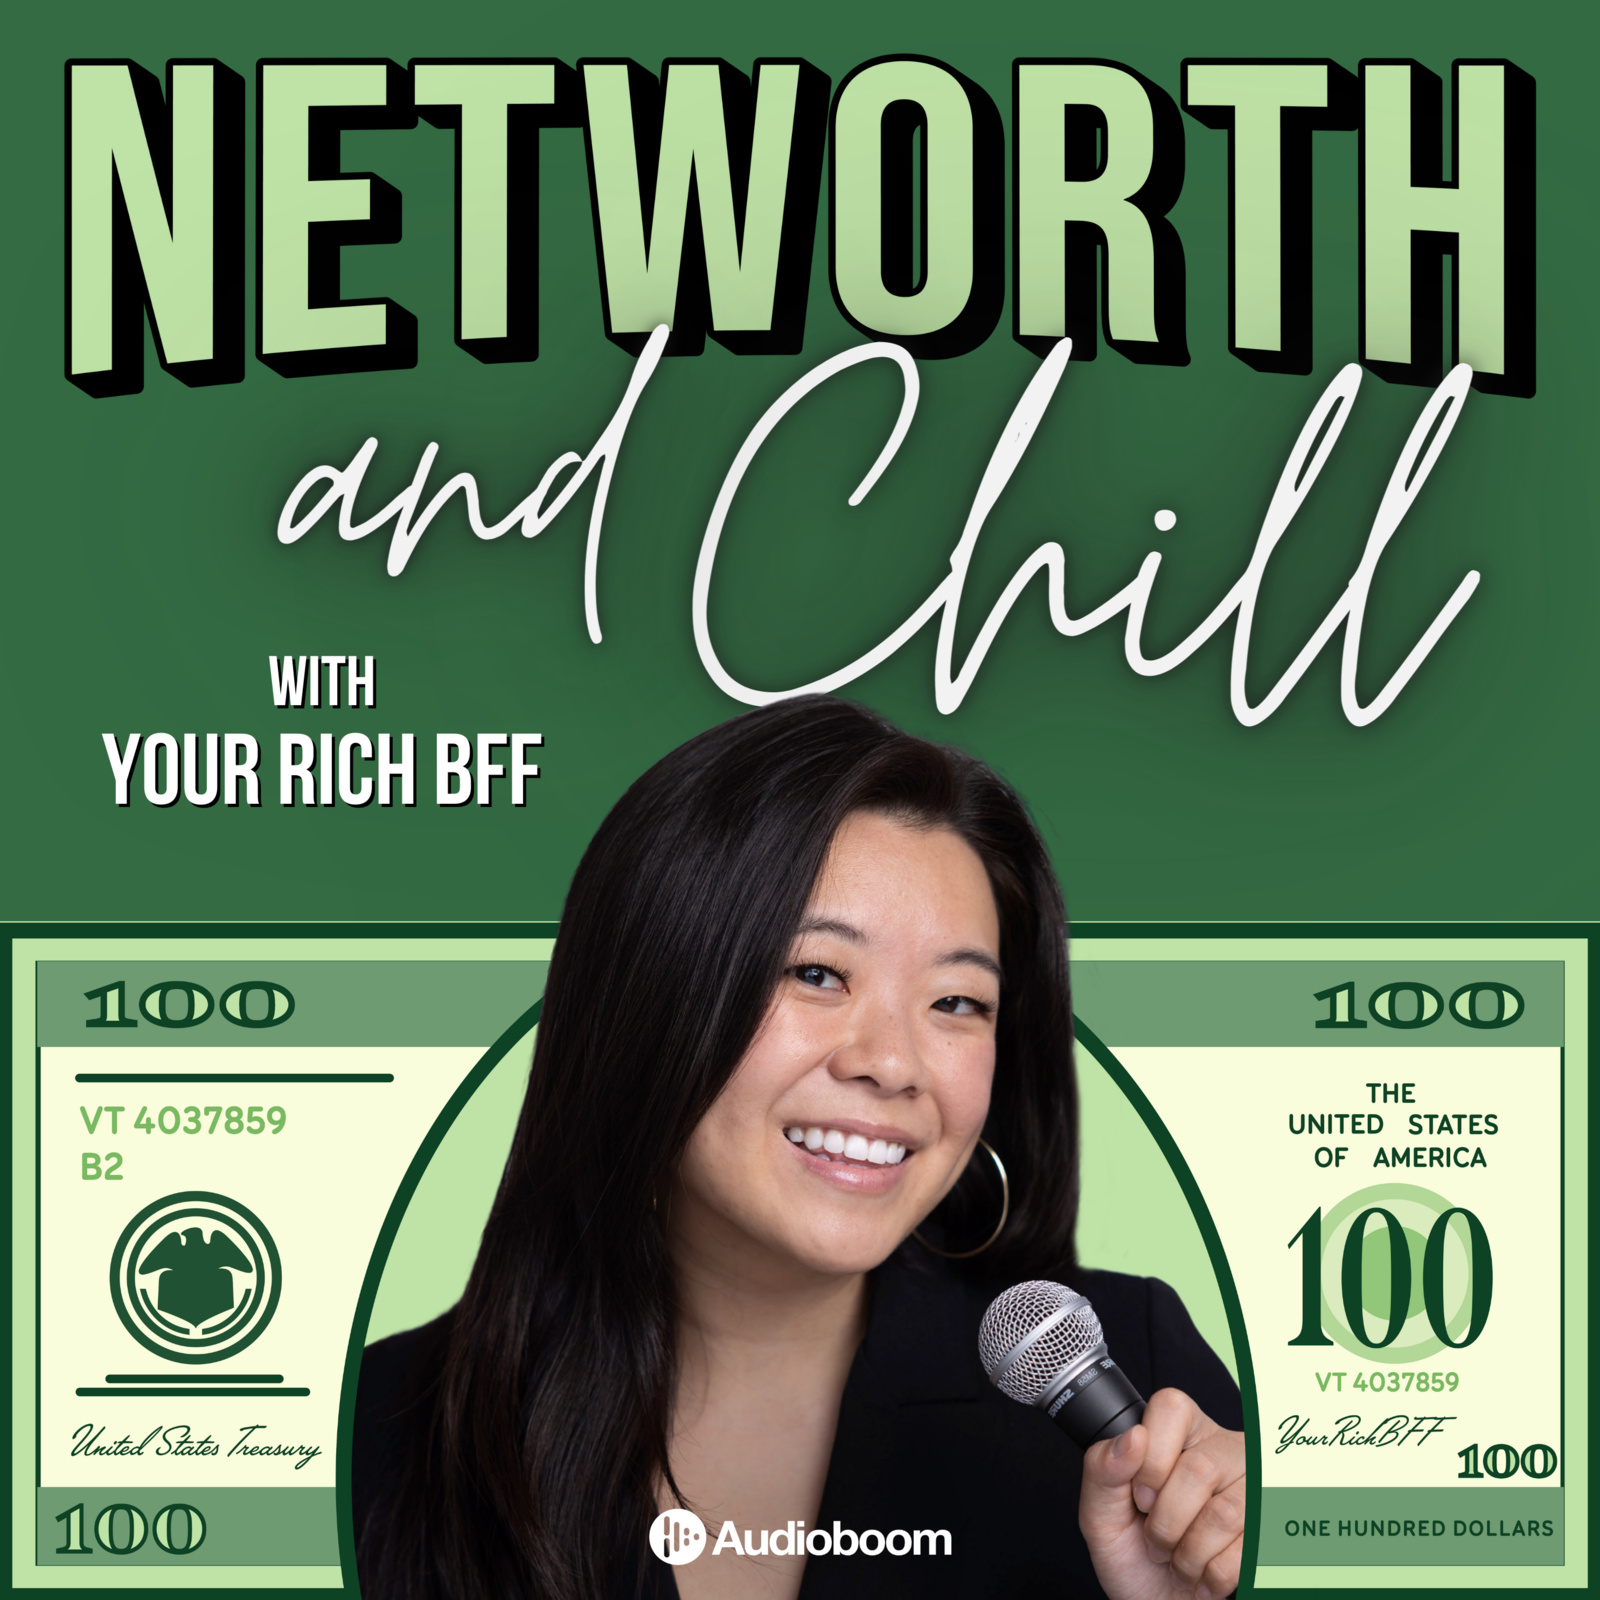 Networth and Chill with Your Rich BFF by Audioboom Studios